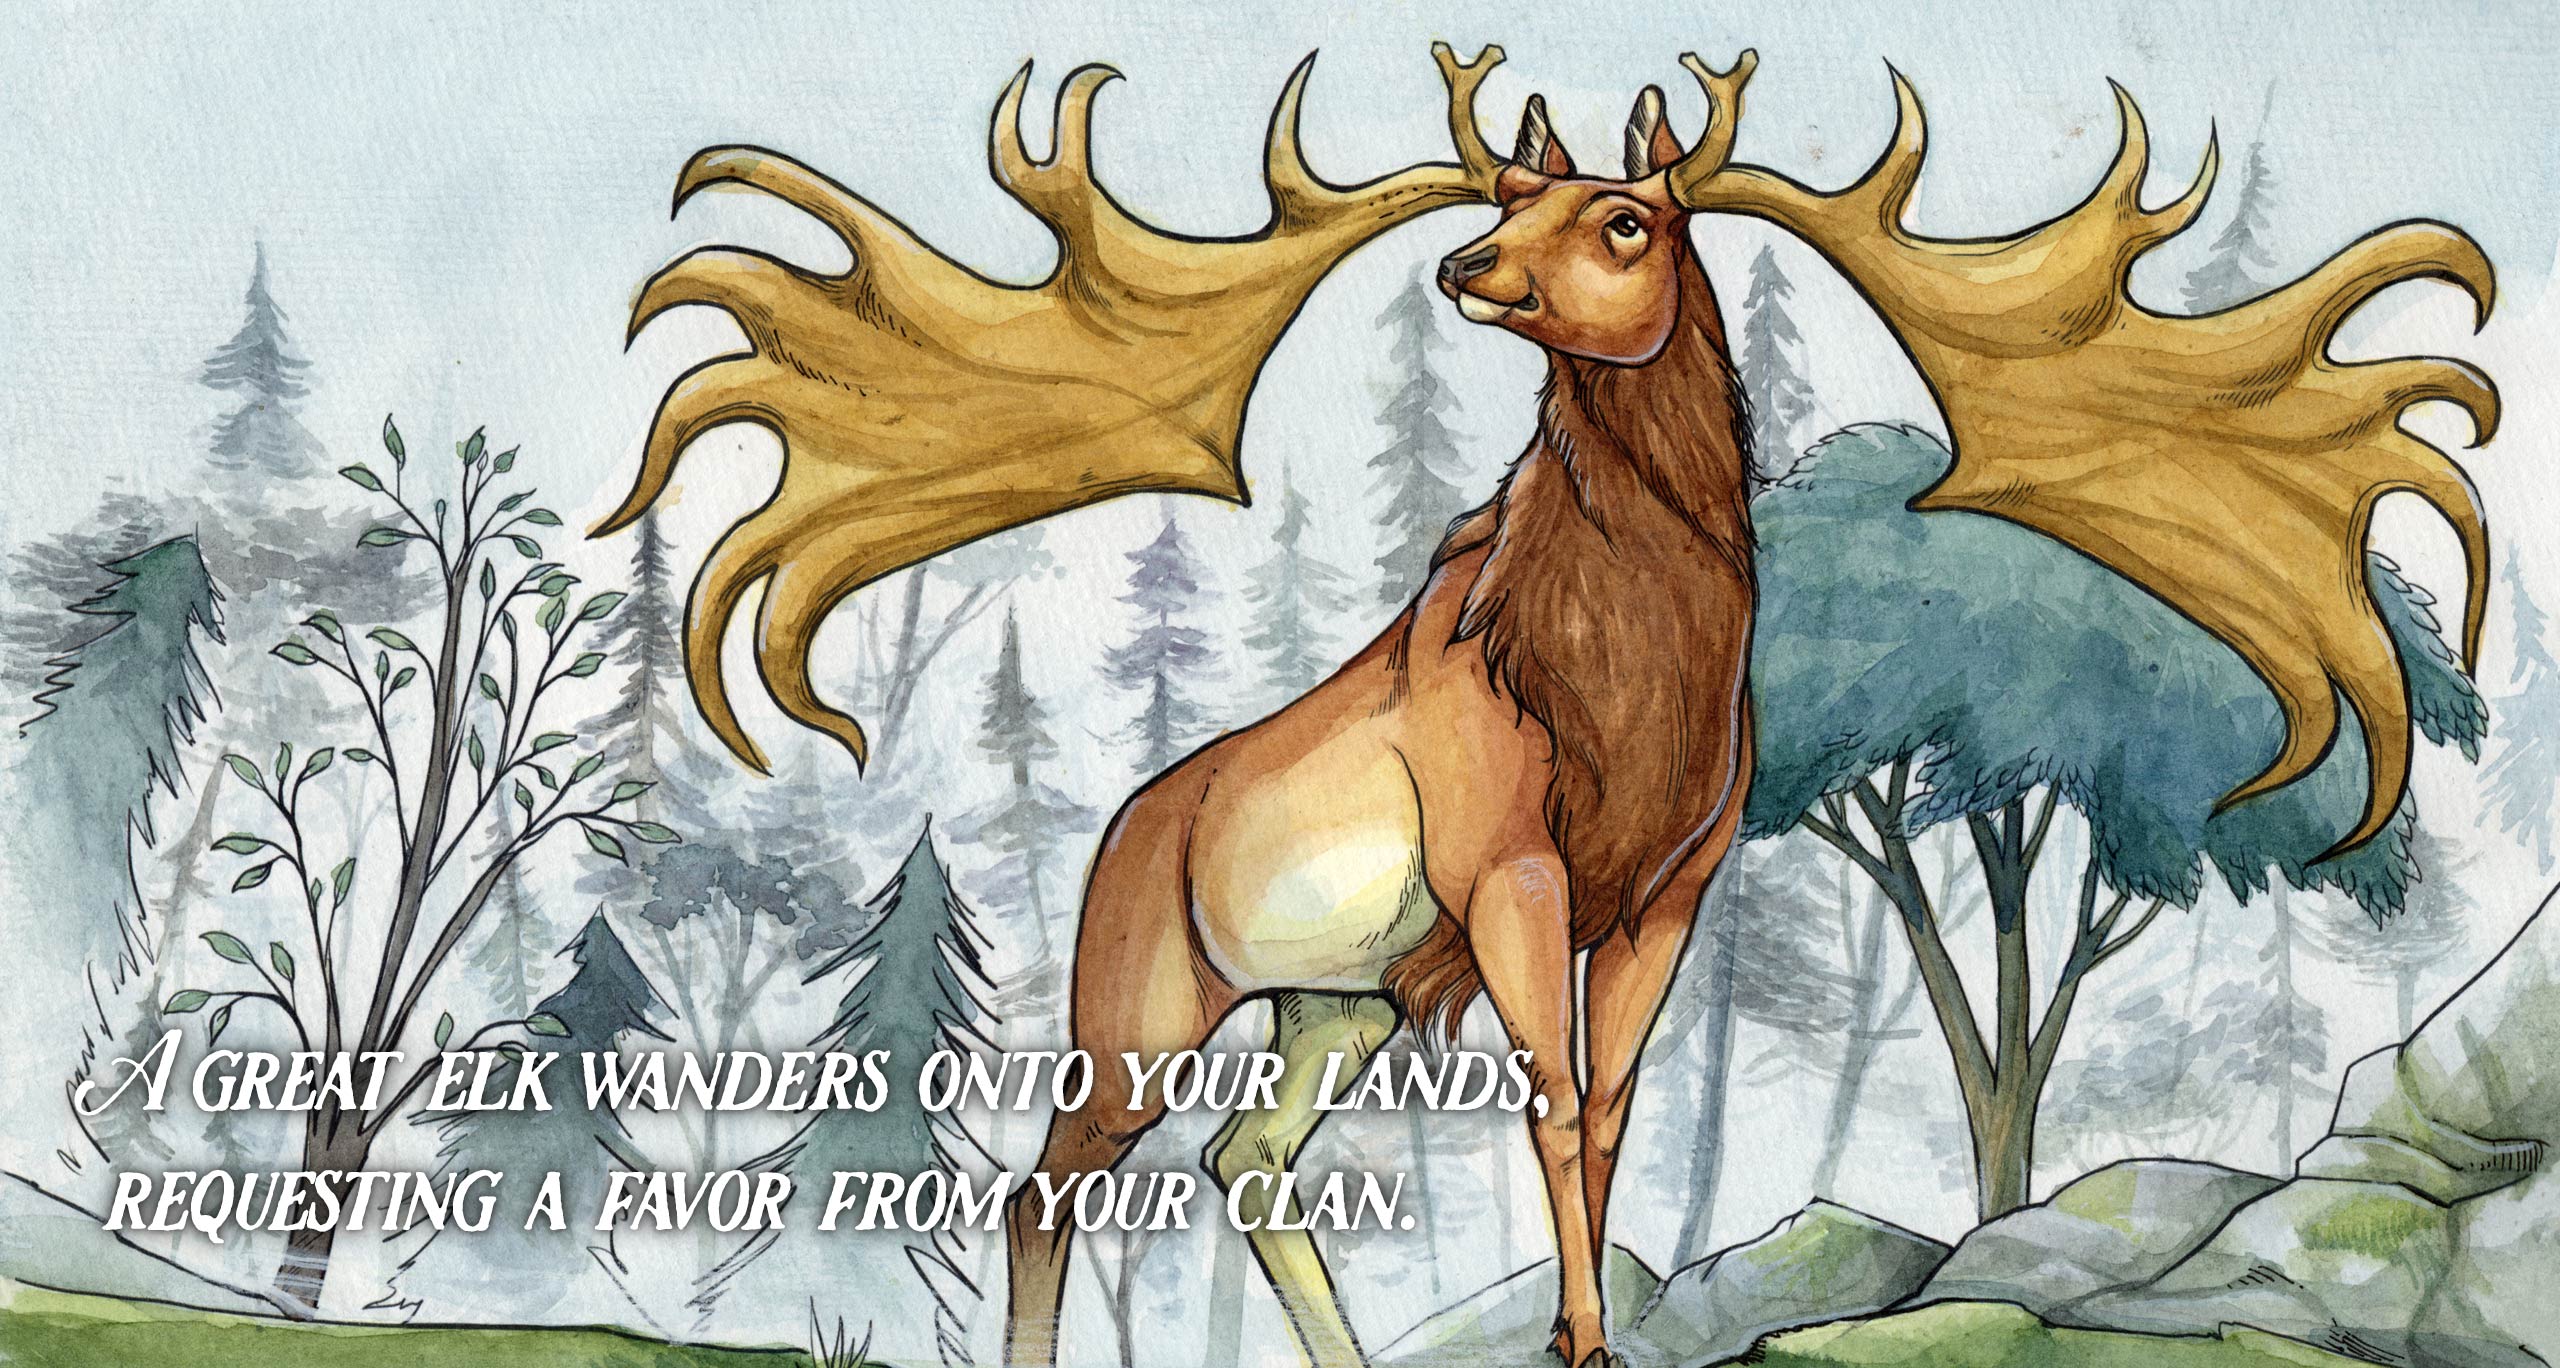 A great elk wanders onto your lands, requesting a favor from your clan.